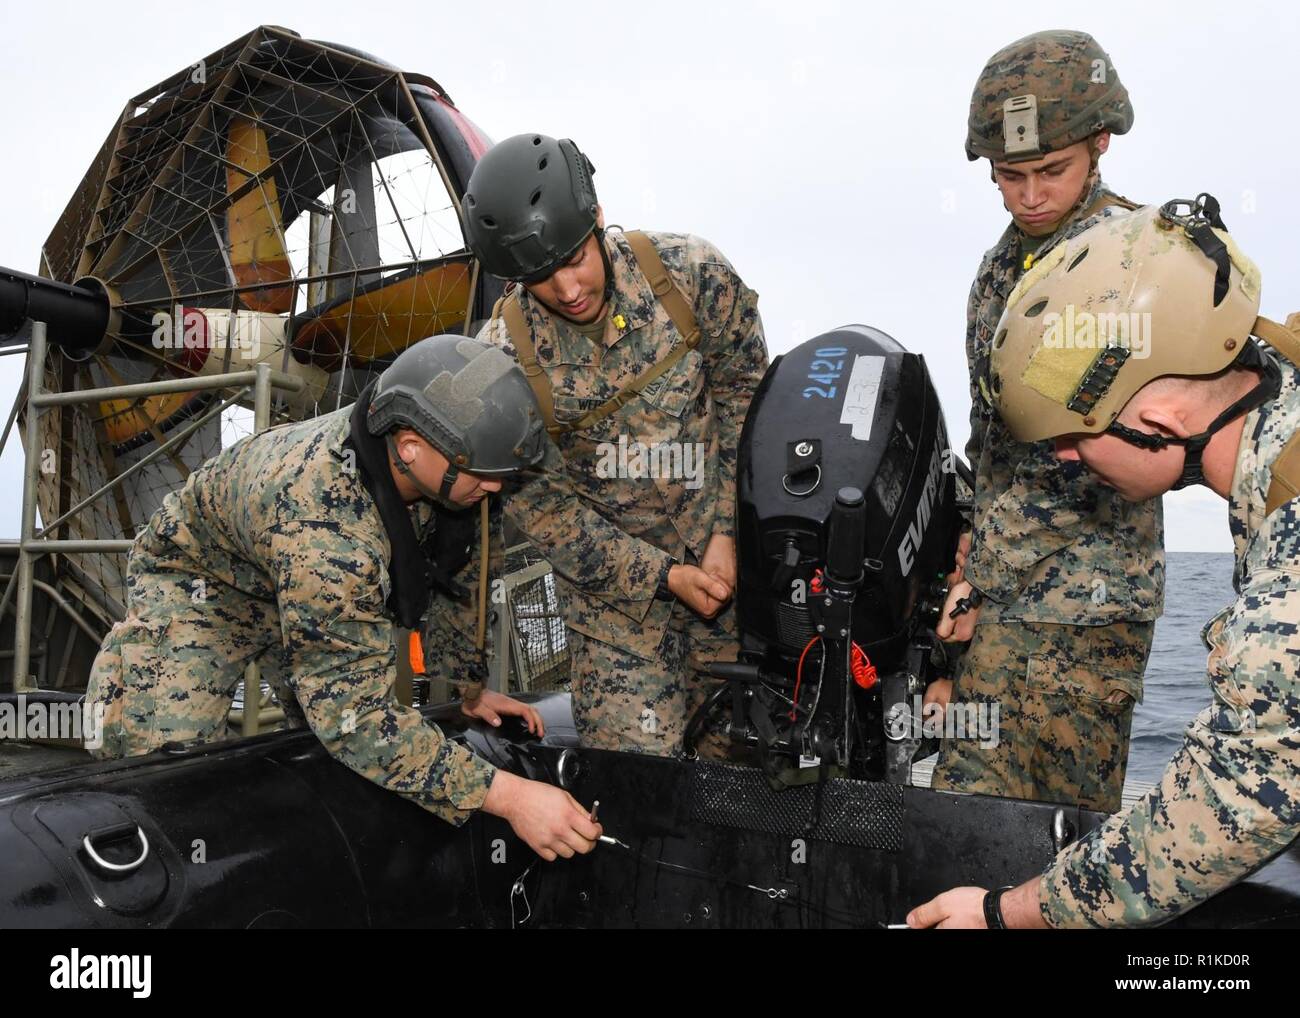 EAST CHINA SEA (Oct. 14, 2018) Cpl. Mateo Johnson, Sgt. Mark Weber, Lance Cpl. Jonah Massey, and Cpl. Nierengarten, assigned to the 31st Marine Expeditionary Unit (MEU), mount an engine to a combat rubber raiding craft aboard a landing craft, air cushion, assigned to Naval Beach Unit 7, during integrated unit level training. The amphibious assault ship USS Wasp (LHD 1), flagship of Wasp Amphibious Ready Group, with embarked 31st Marine Expeditionary Unit, is operating in the Indo-Pacific region to enhance interoperability with partners and serve as a ready-response force for any type of contin Stock Photo